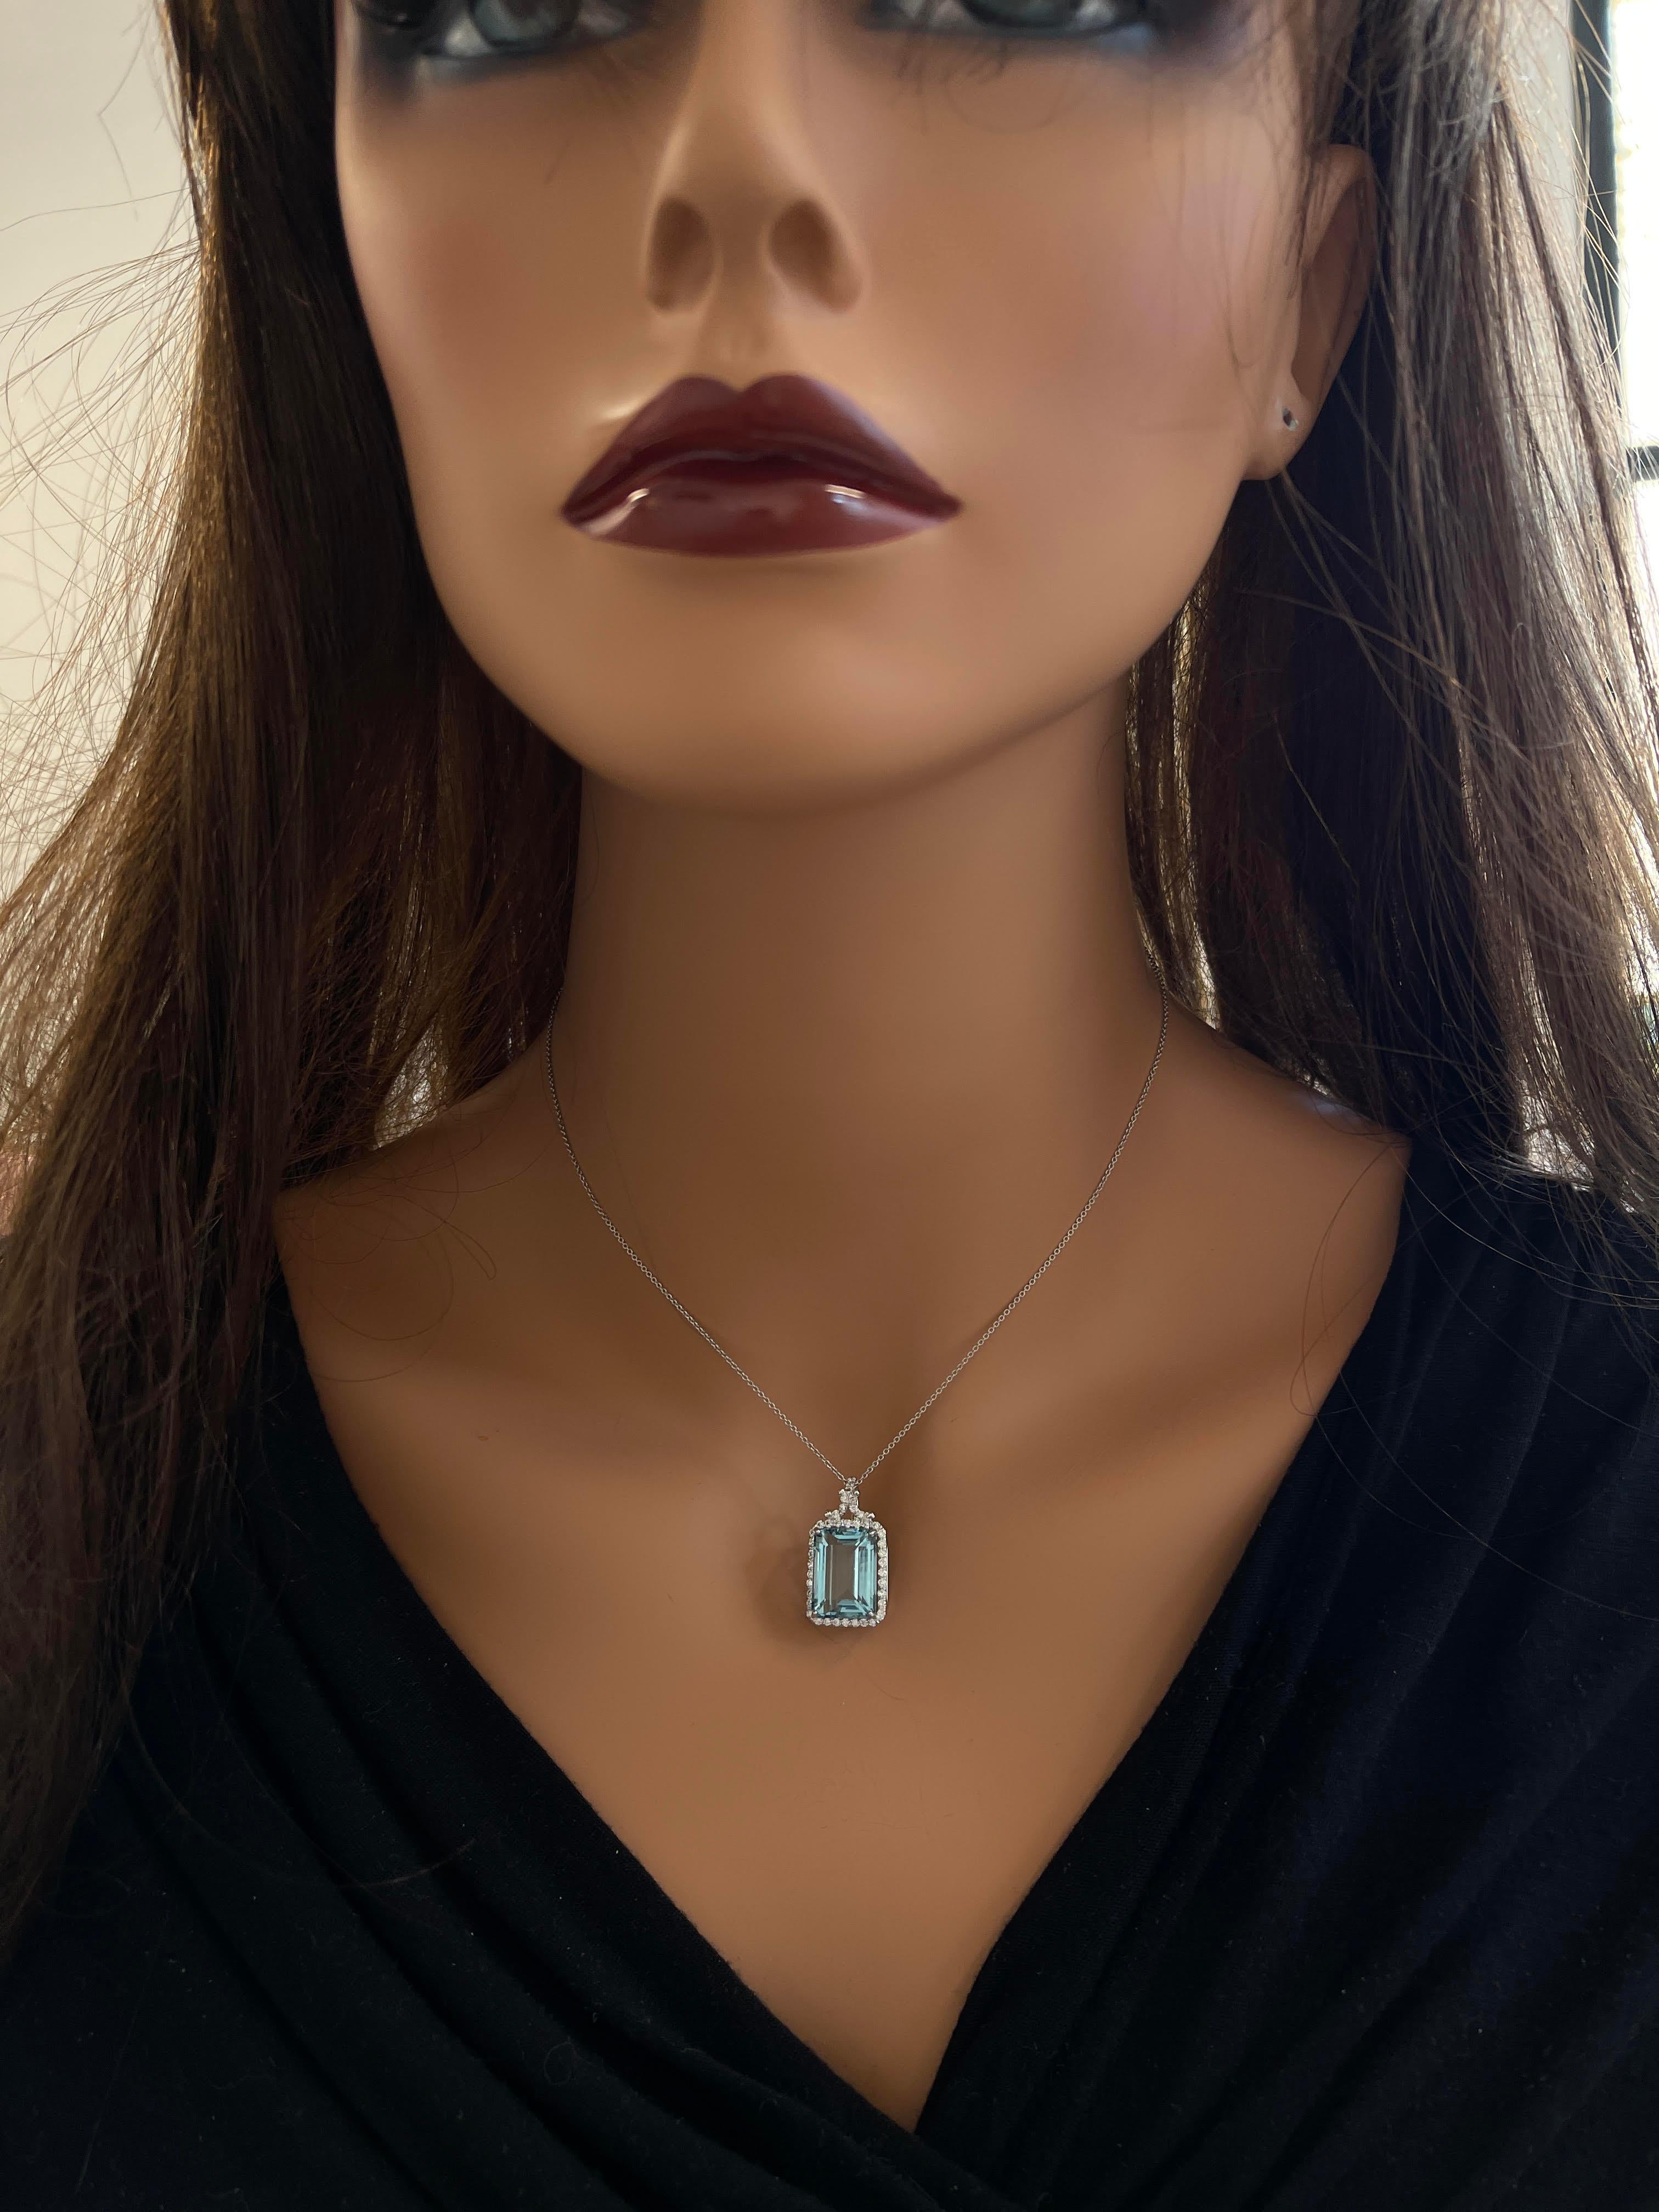 Gorgeous And Classic Emerald-cut Halo Pendant Features An Aquamarine weighing 8.68 carats. The gem source is Brazil. Framed by 1.00 Carat Of Round Brilliant Diamonds Set in 18k White Gold, this is the classic necklace.